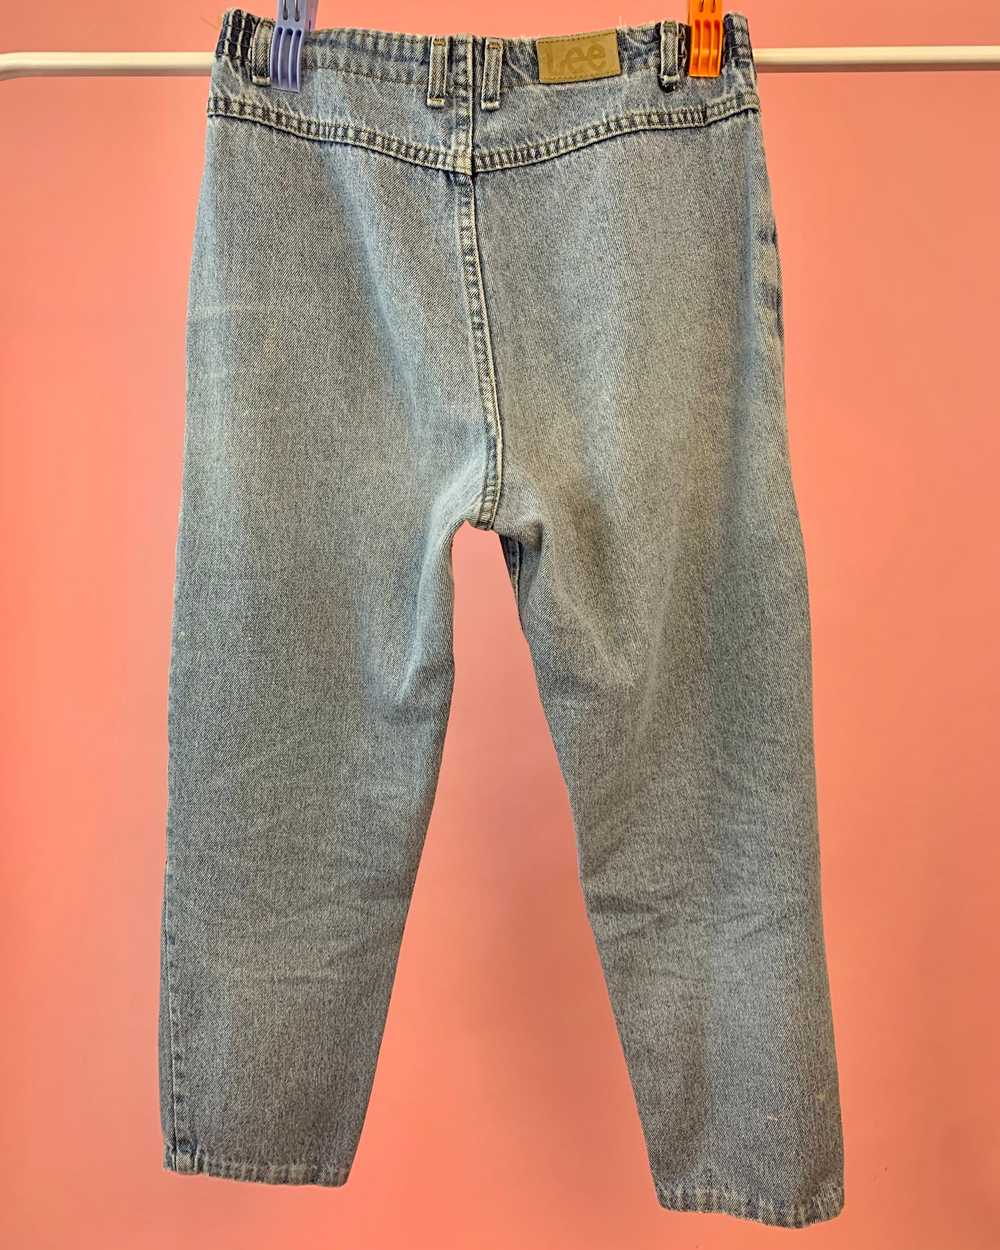 90’s extreme high waisted jeans - image 10